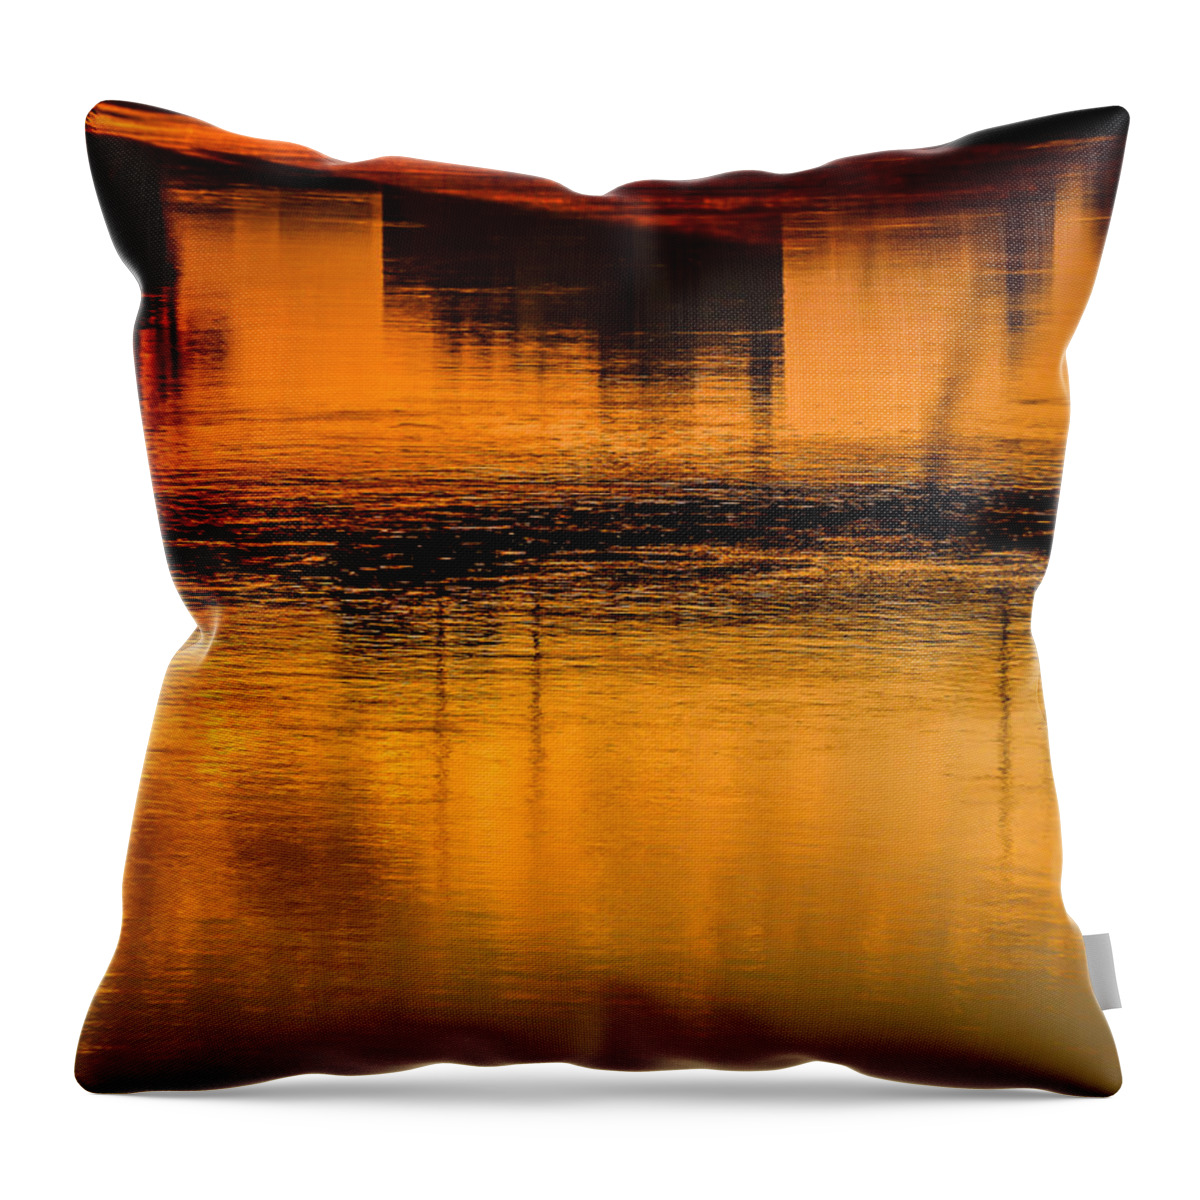 Danube Throw Pillow featuring the photograph Danube Glimmer by Pamela Newcomb